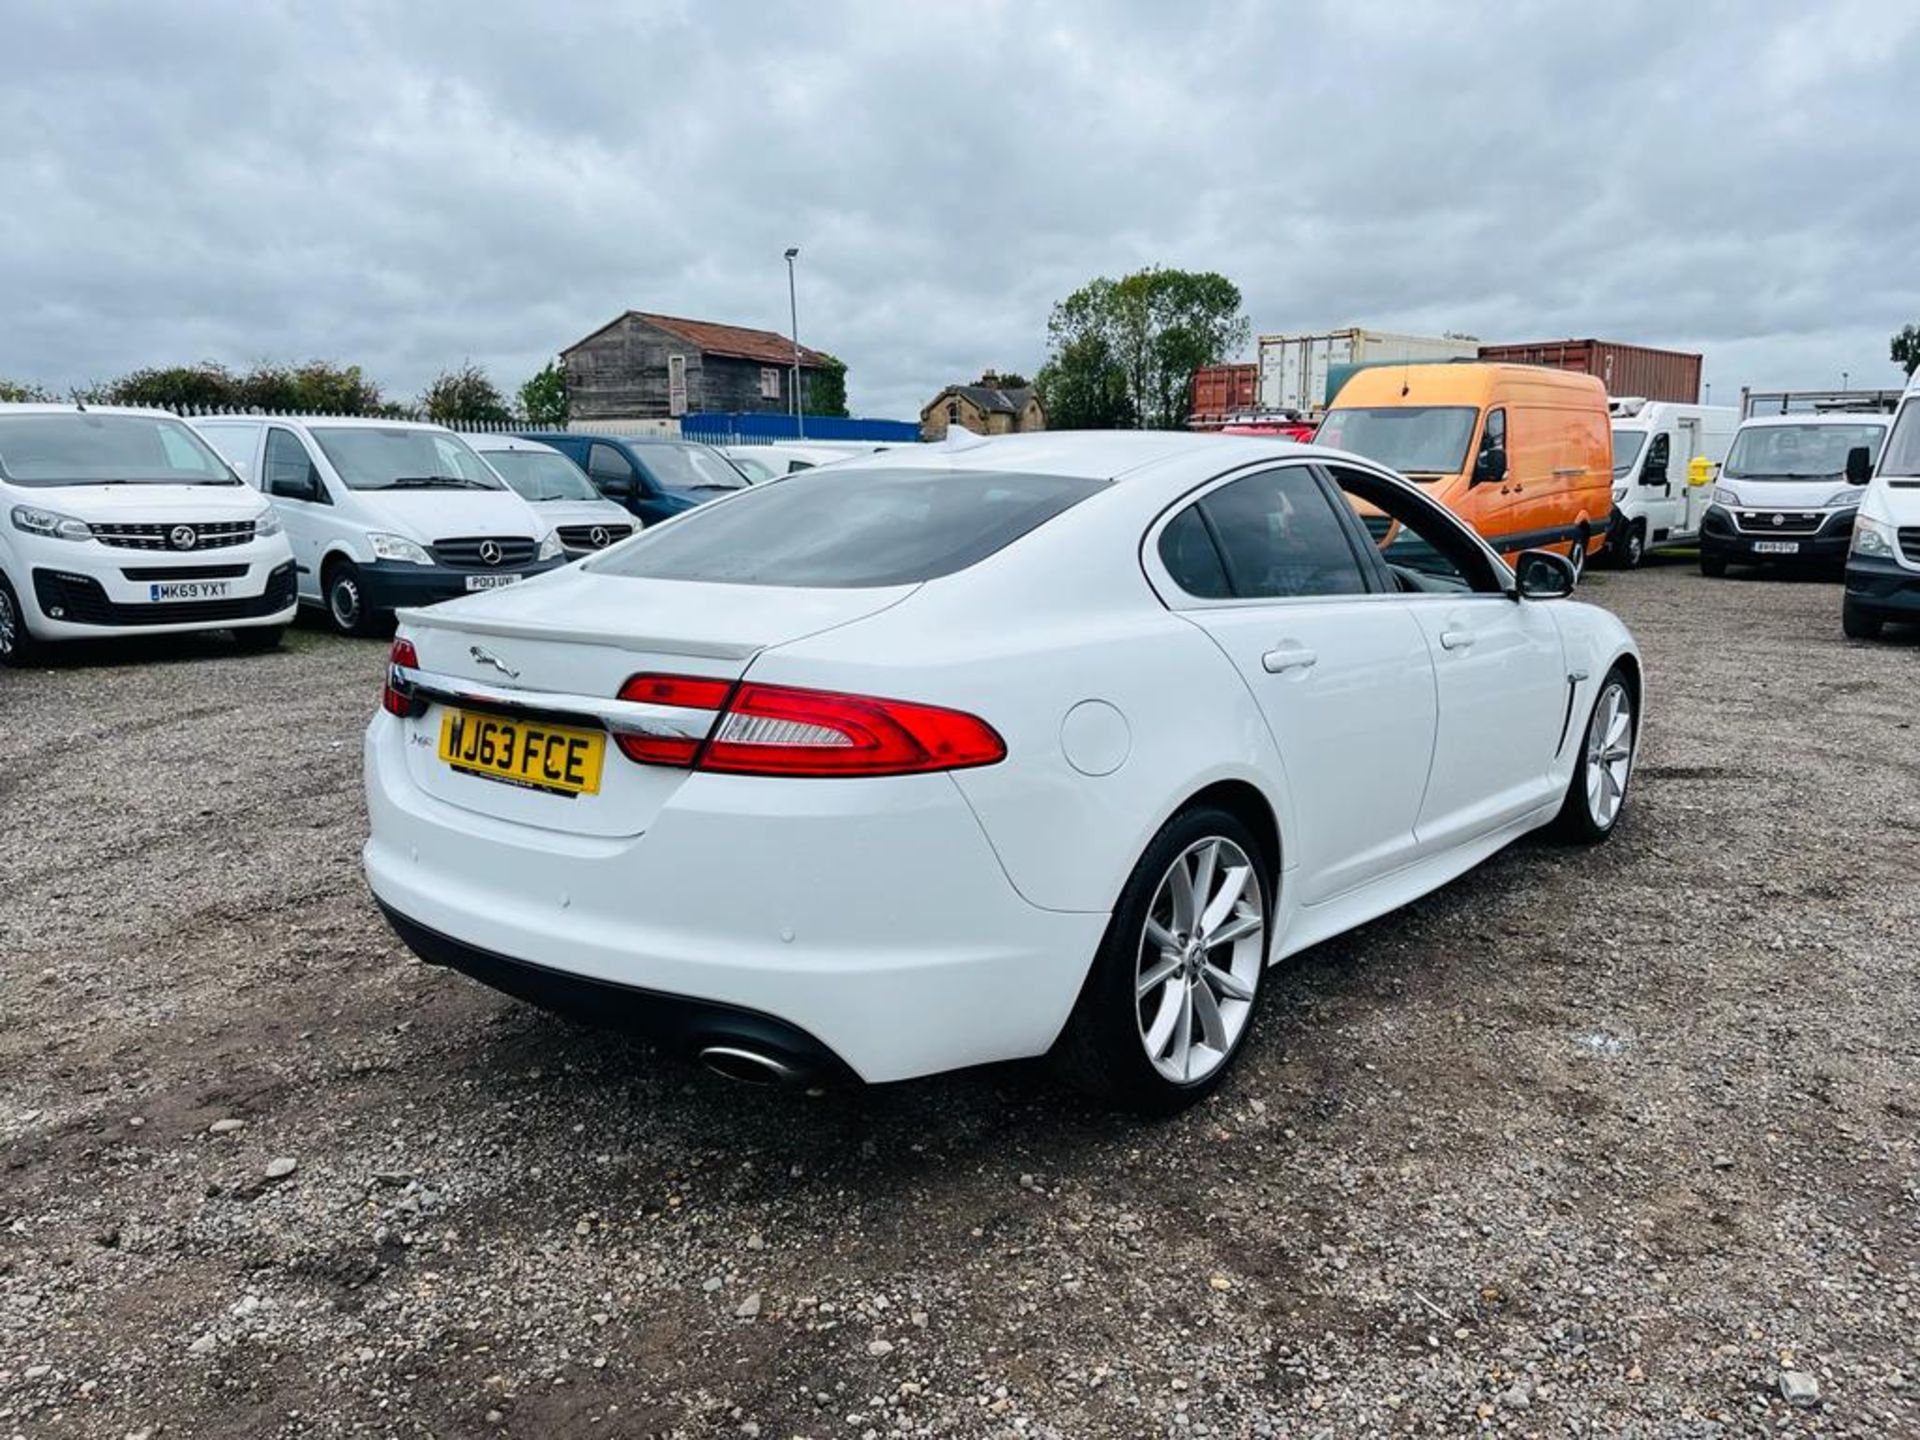 ** ON SALE ** Jaguar XF Sport D 200 2.2 2013 "63 Reg" - Air Conditioning - Touch Screen System - Image 9 of 30